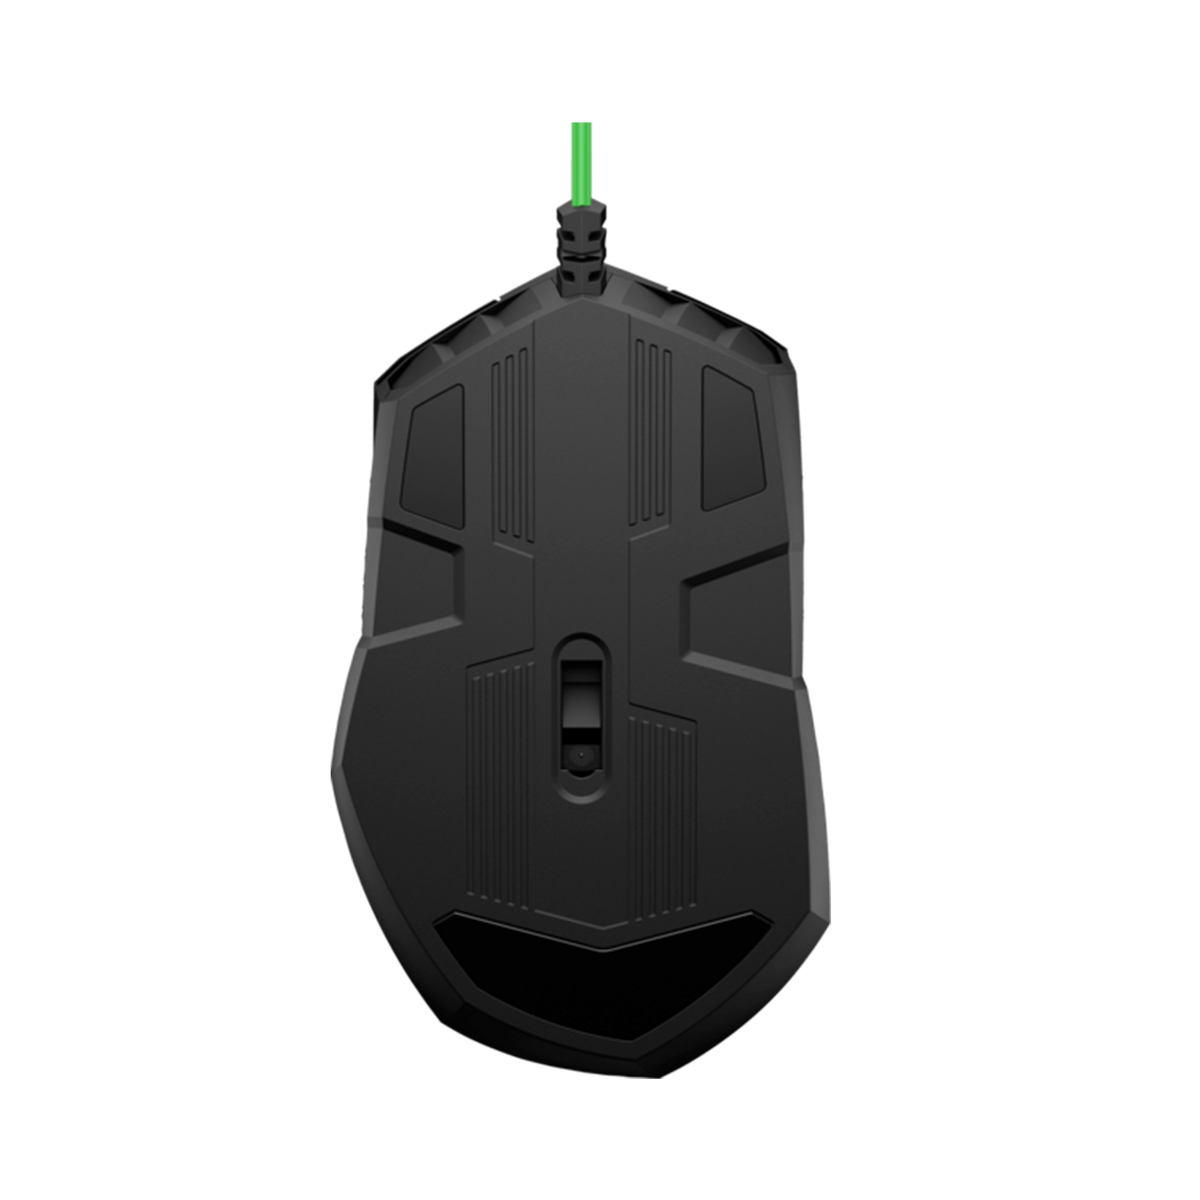 HP Pavilion Gaming Mouse 200 -5JS07AA